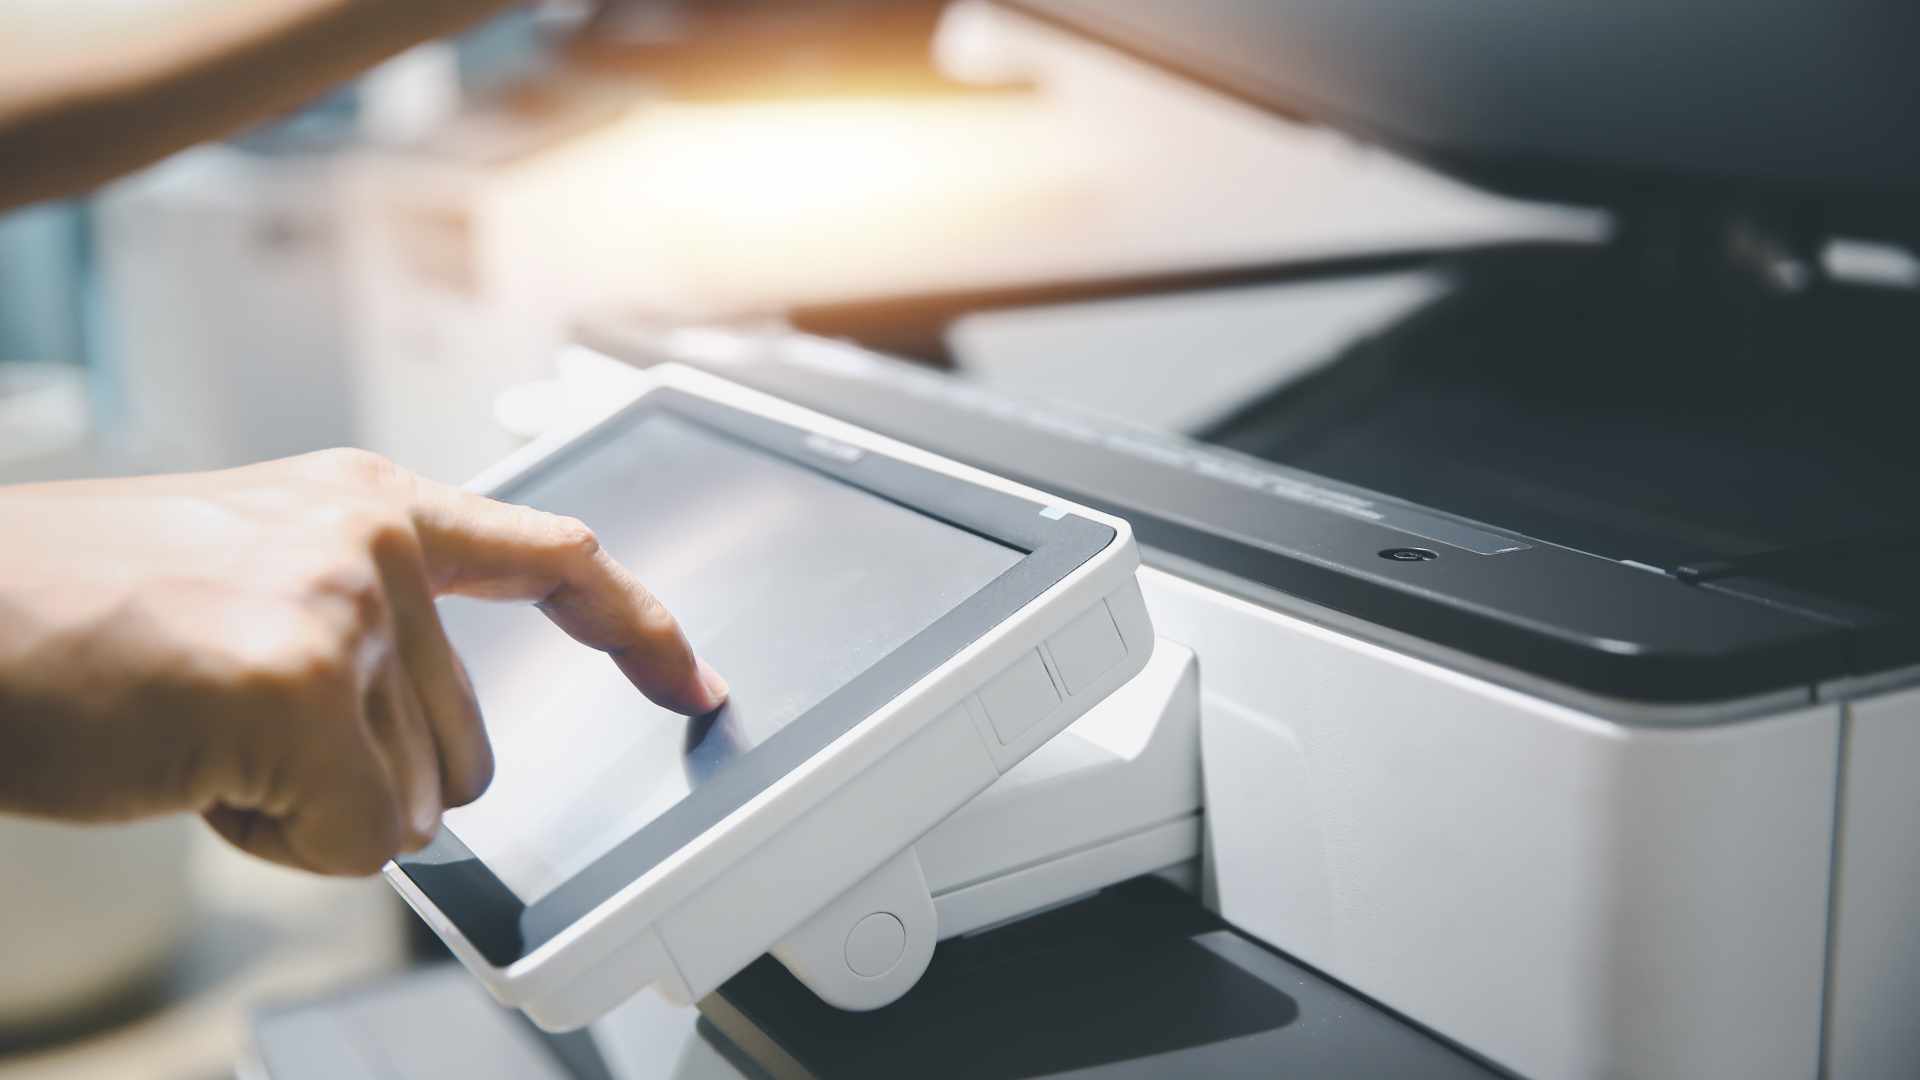 Fax still merits its role in business